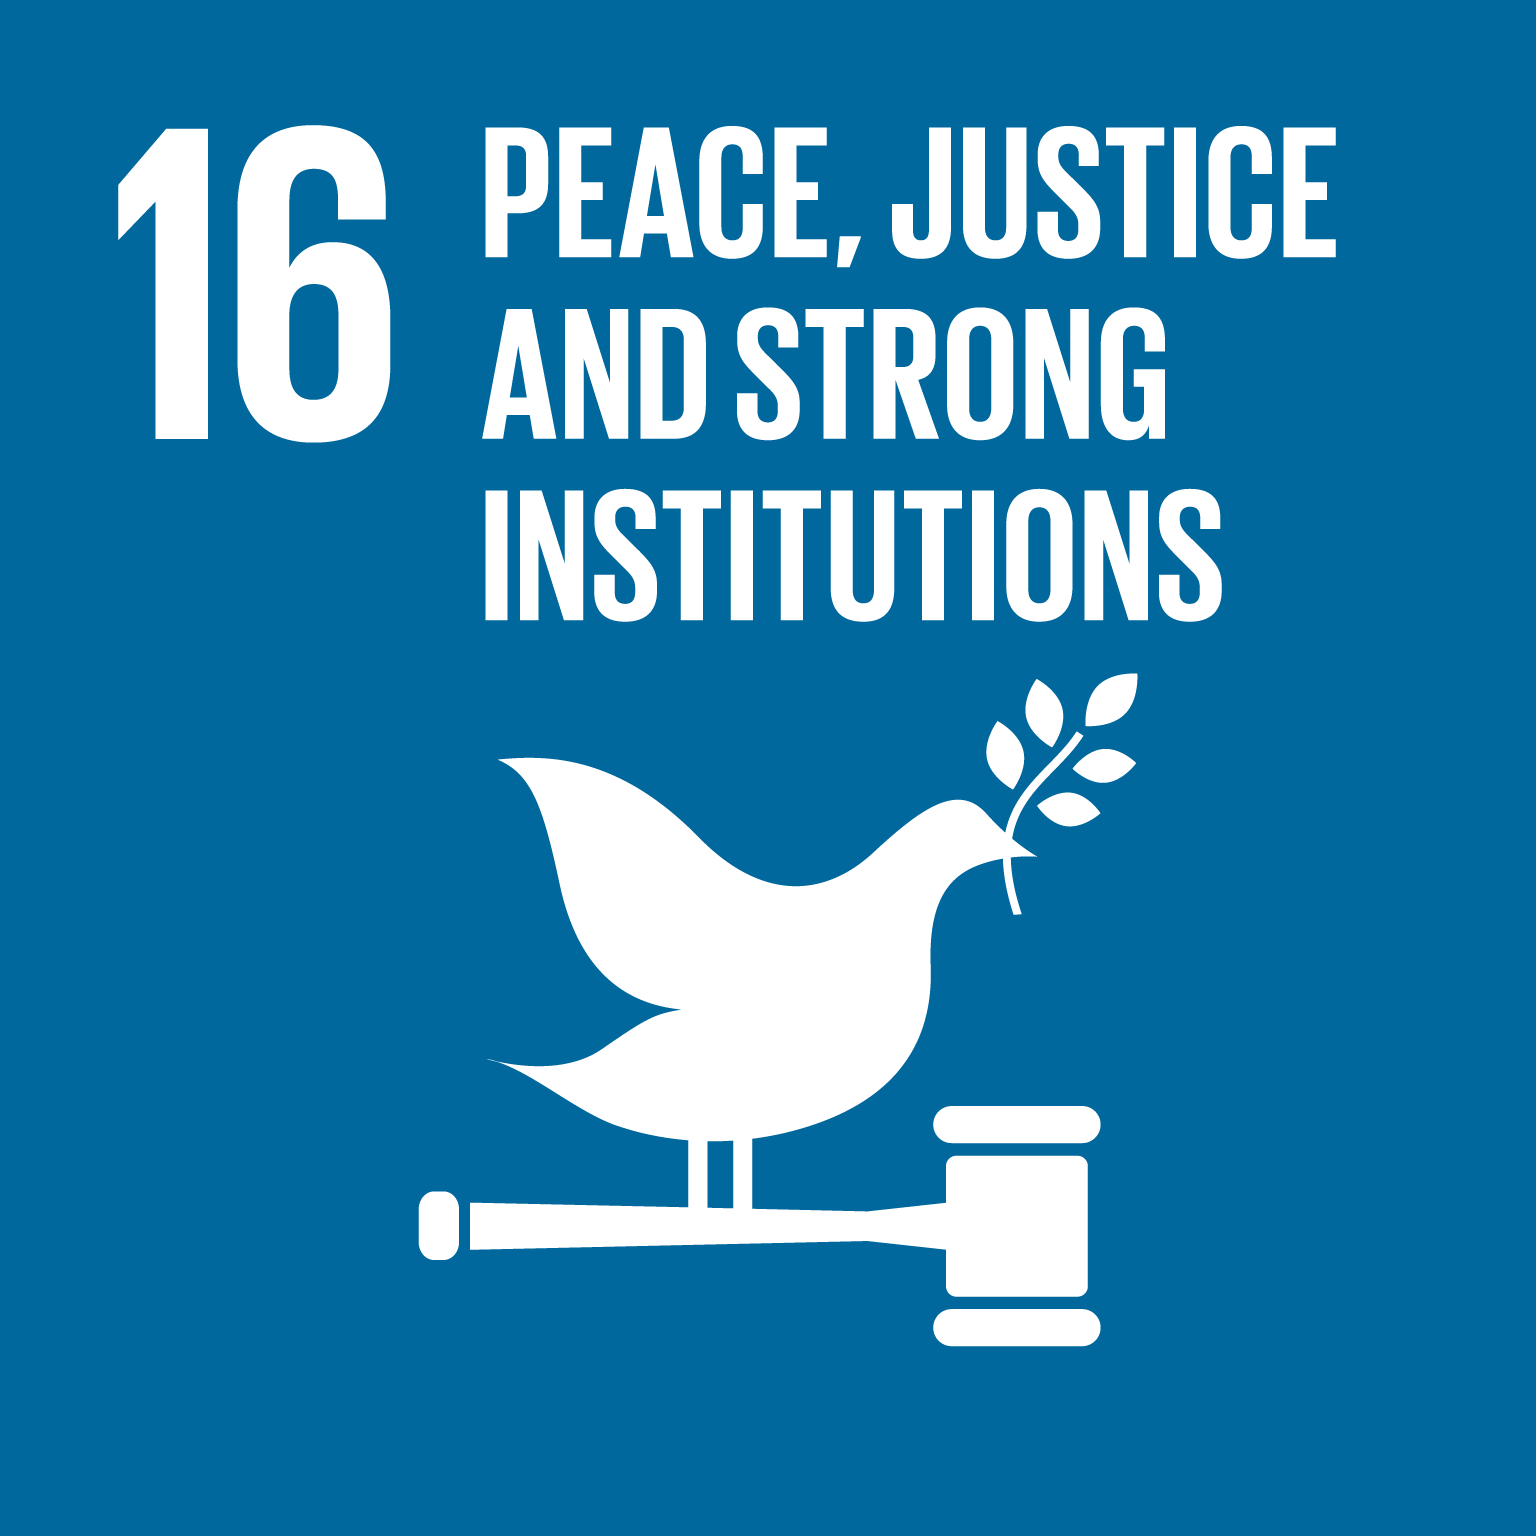 16 PEACE,JUSTICE AND STRONG INSTITUTIONS